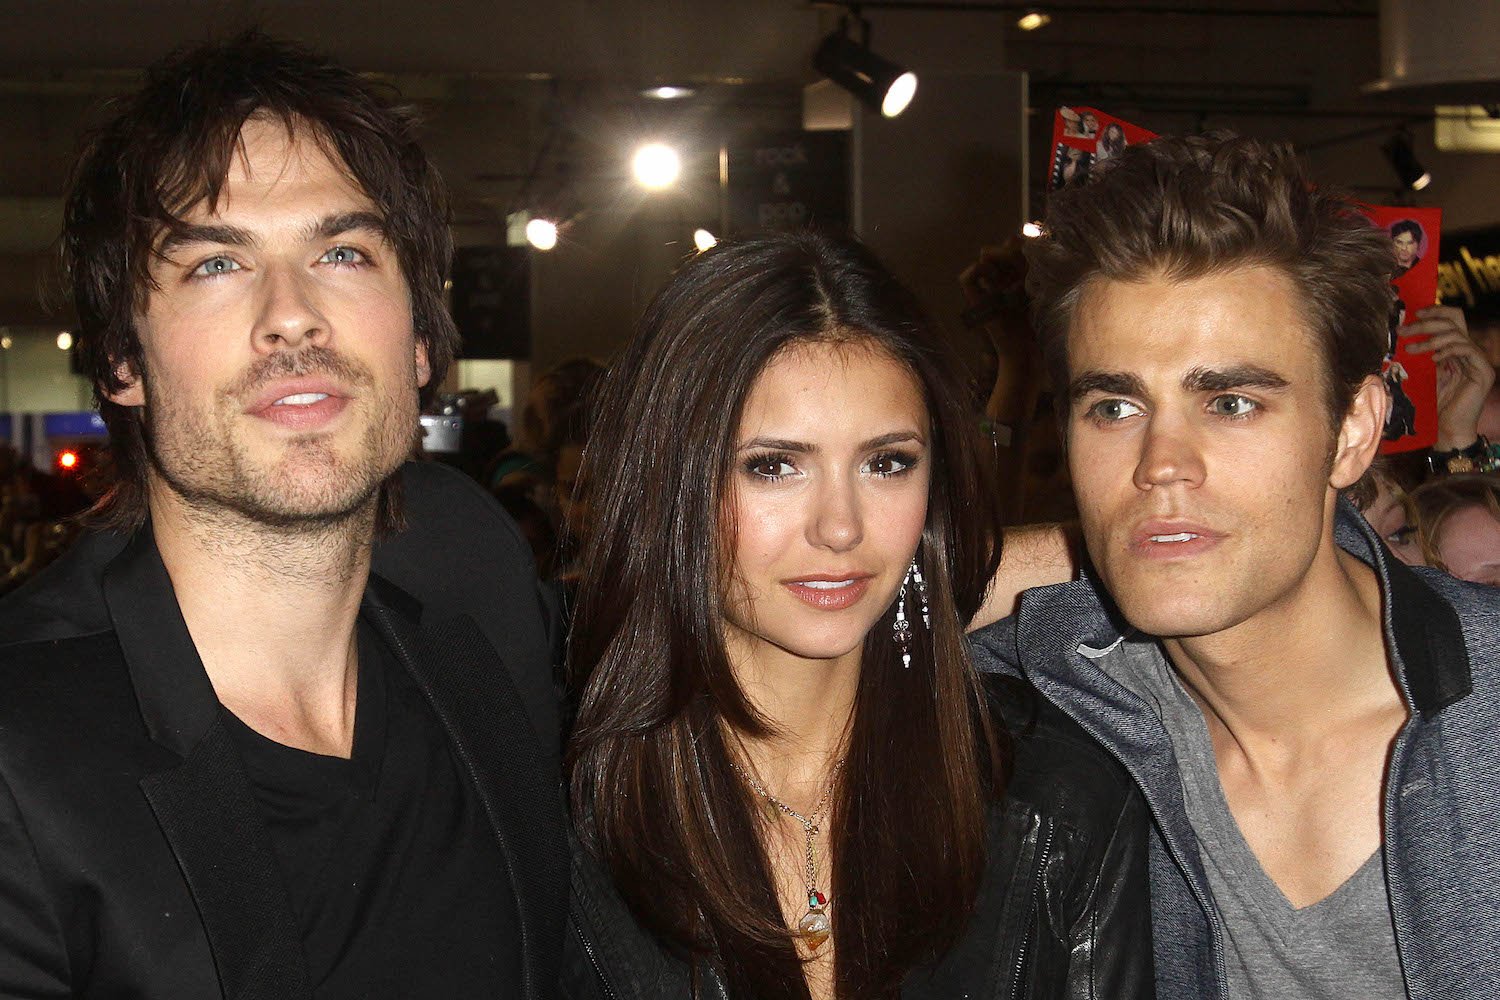 Ian Somerhalder, Nina Dobrev, and Paul Wesley from 'The Vampire Diaries' standing next to each other